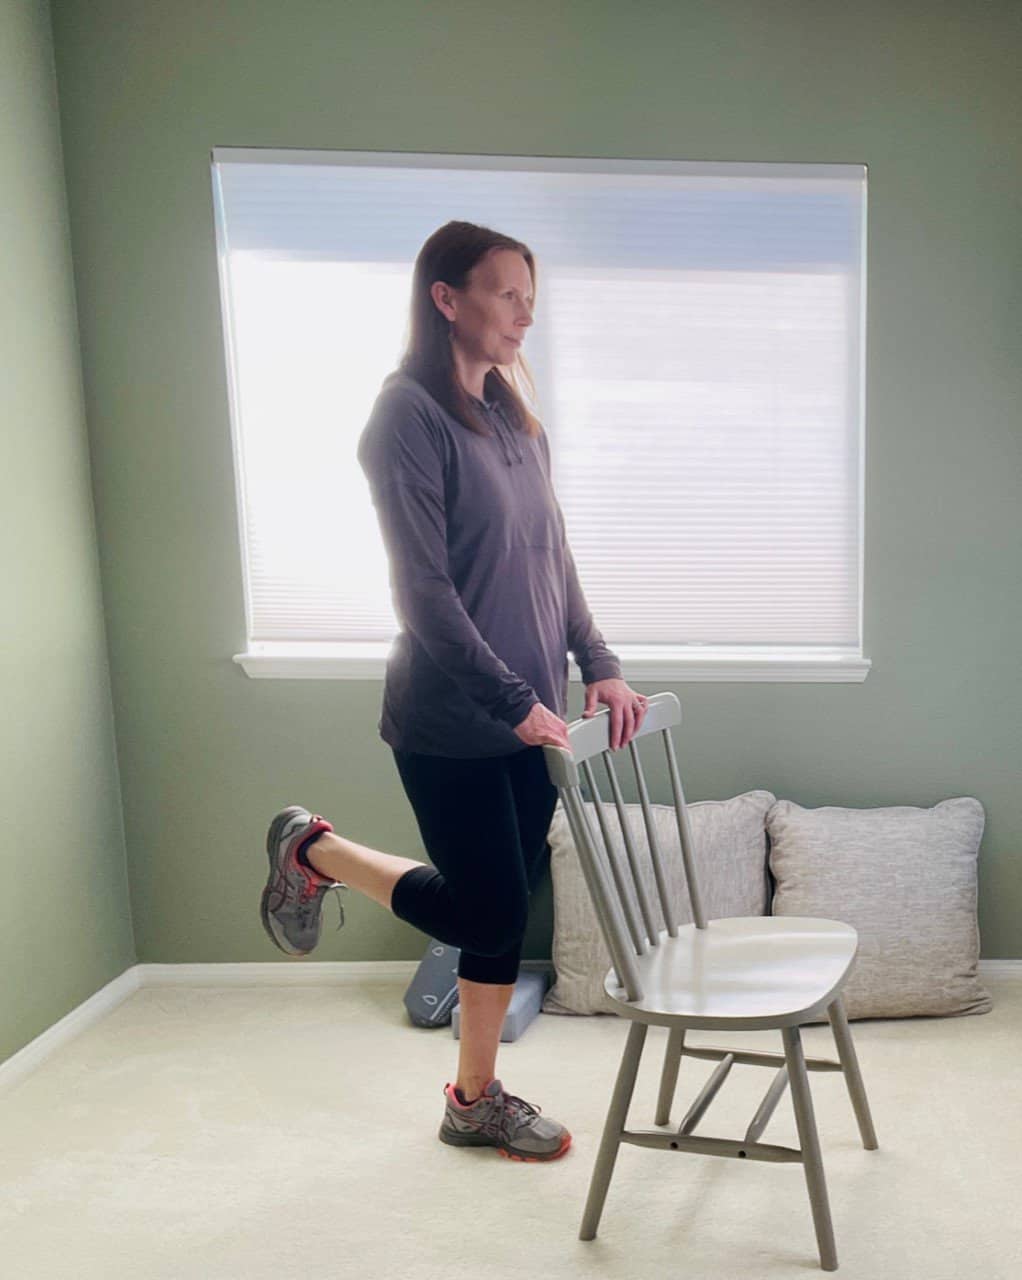 Chair Exercises For Better Posture - The Peaceful Chair